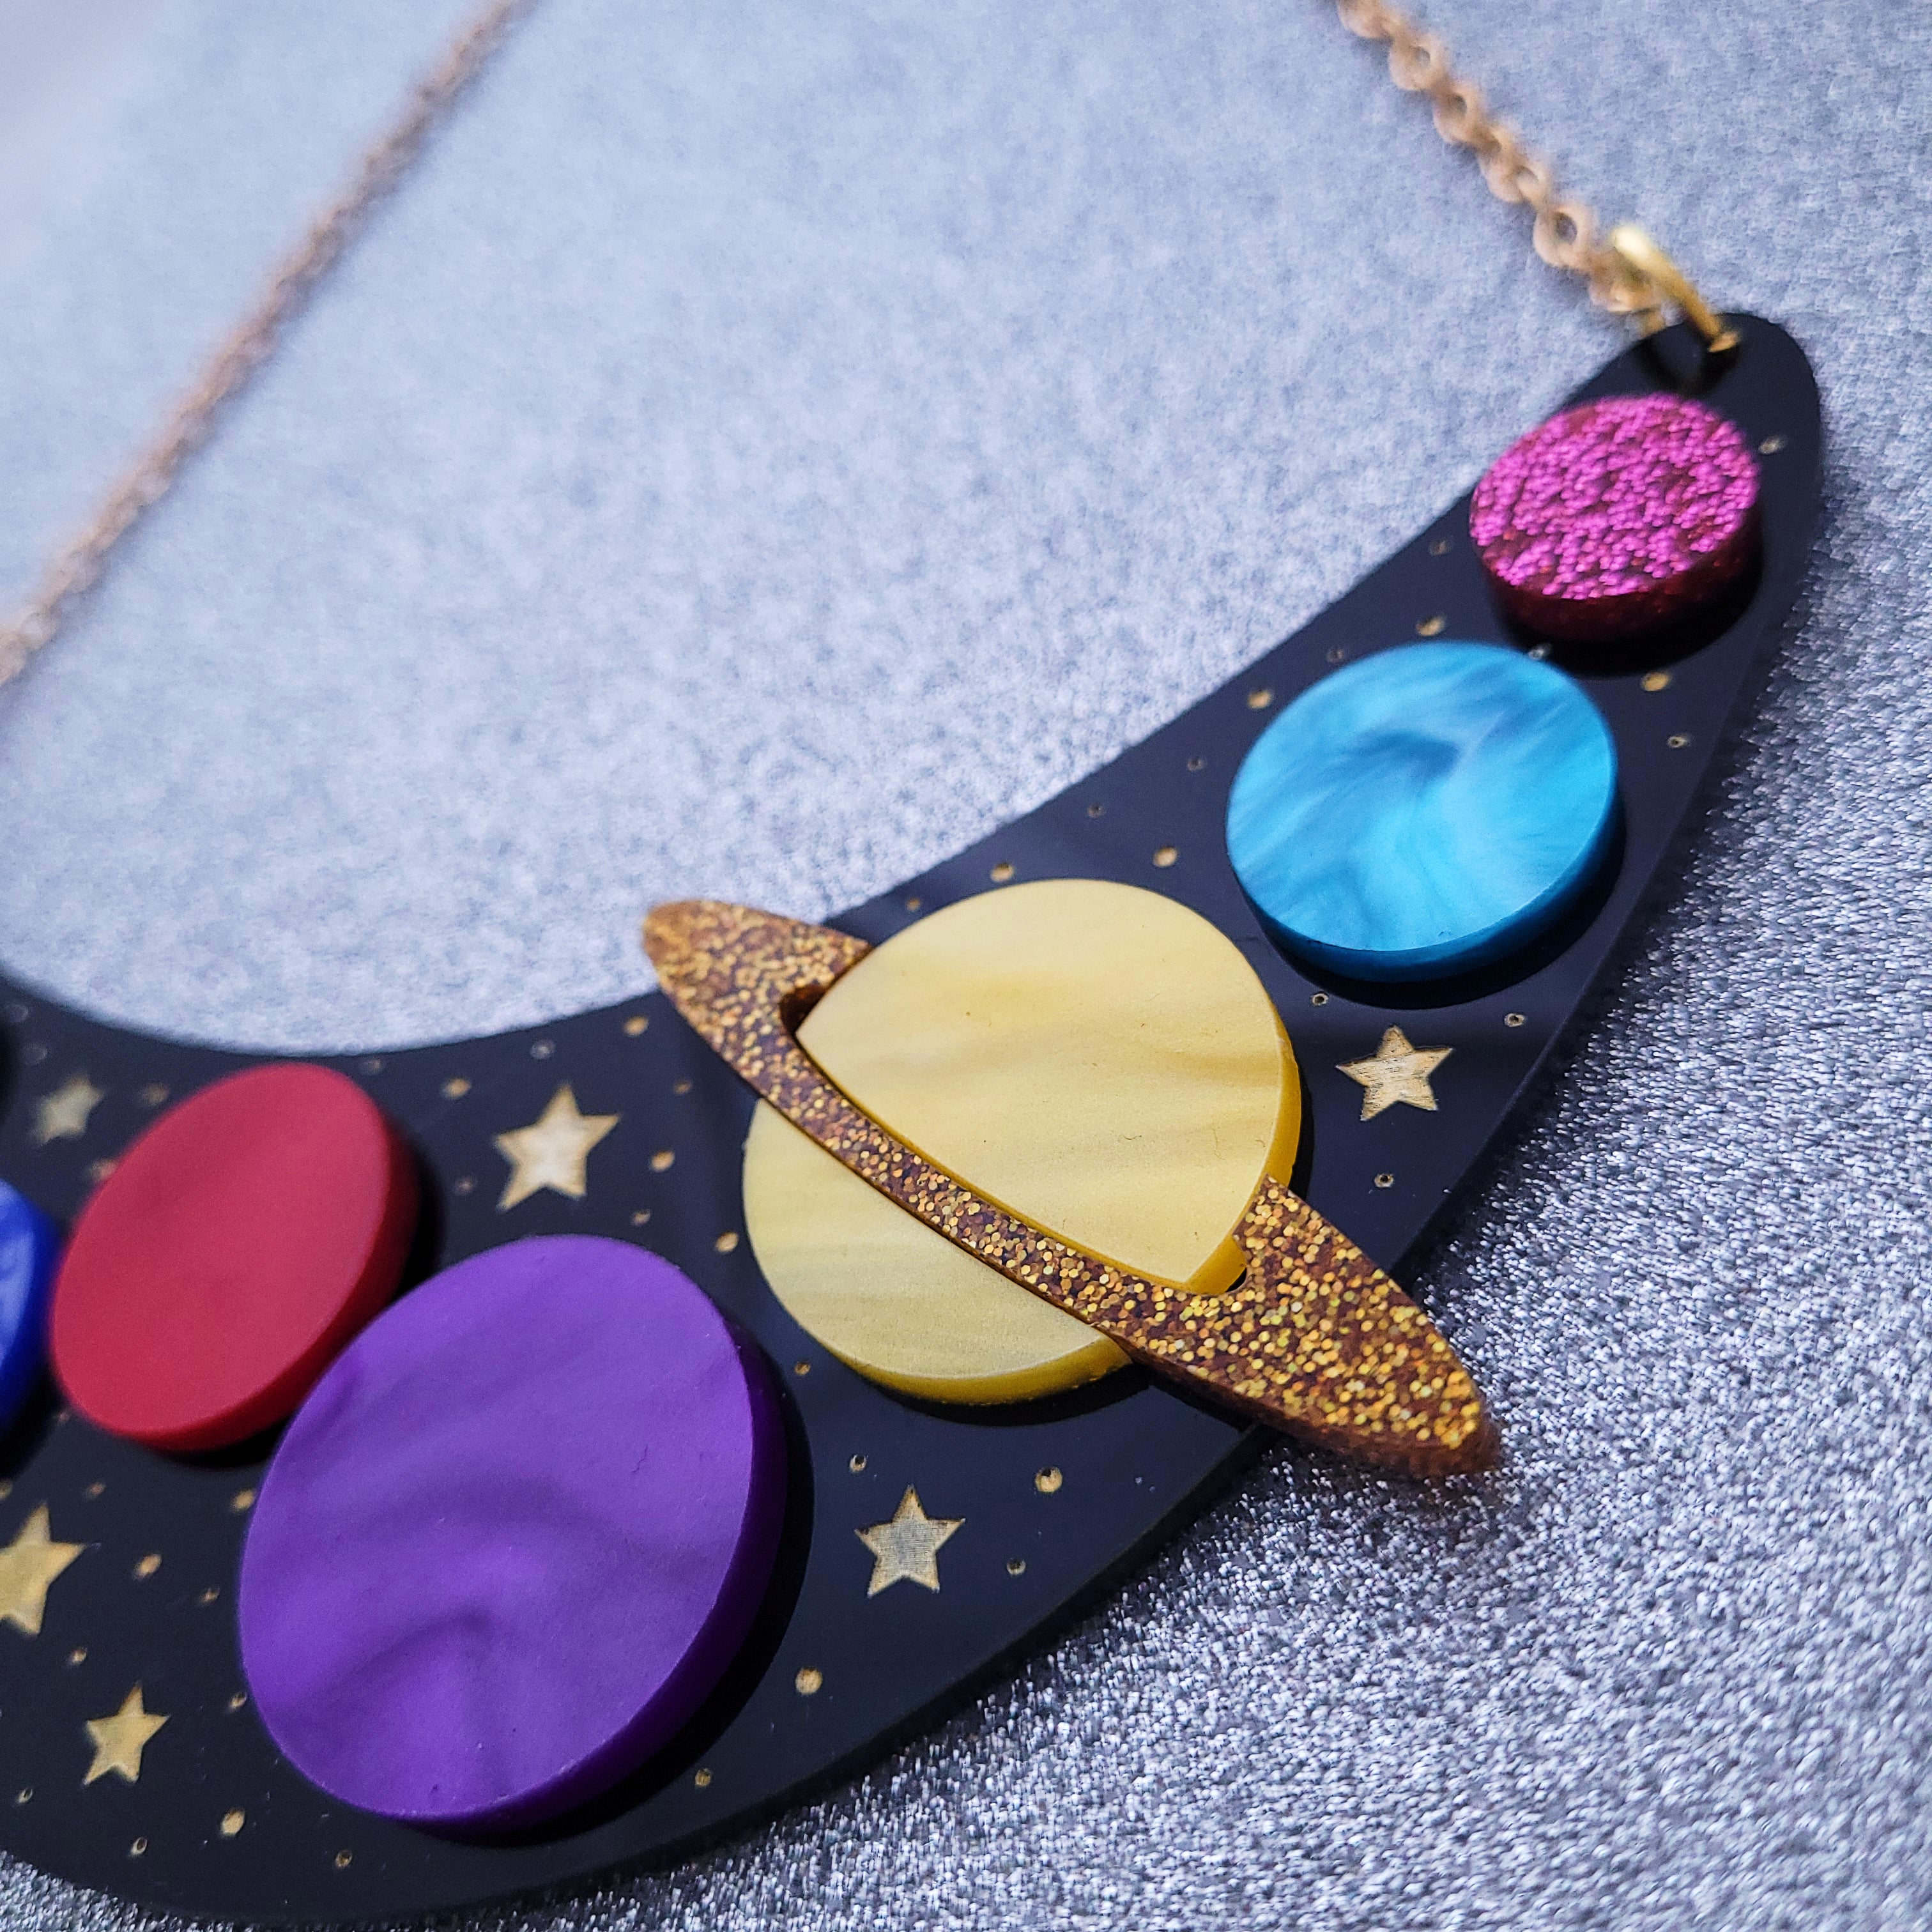 Mush] Brass Tetraorbital Necklace, Spinning Solar System Necklace, Space  Jewelry, Geometric necklace, astronomy necklace, spinning necklace - Shop M  u s h - The Rustic Refined Chokers - Pinkoi